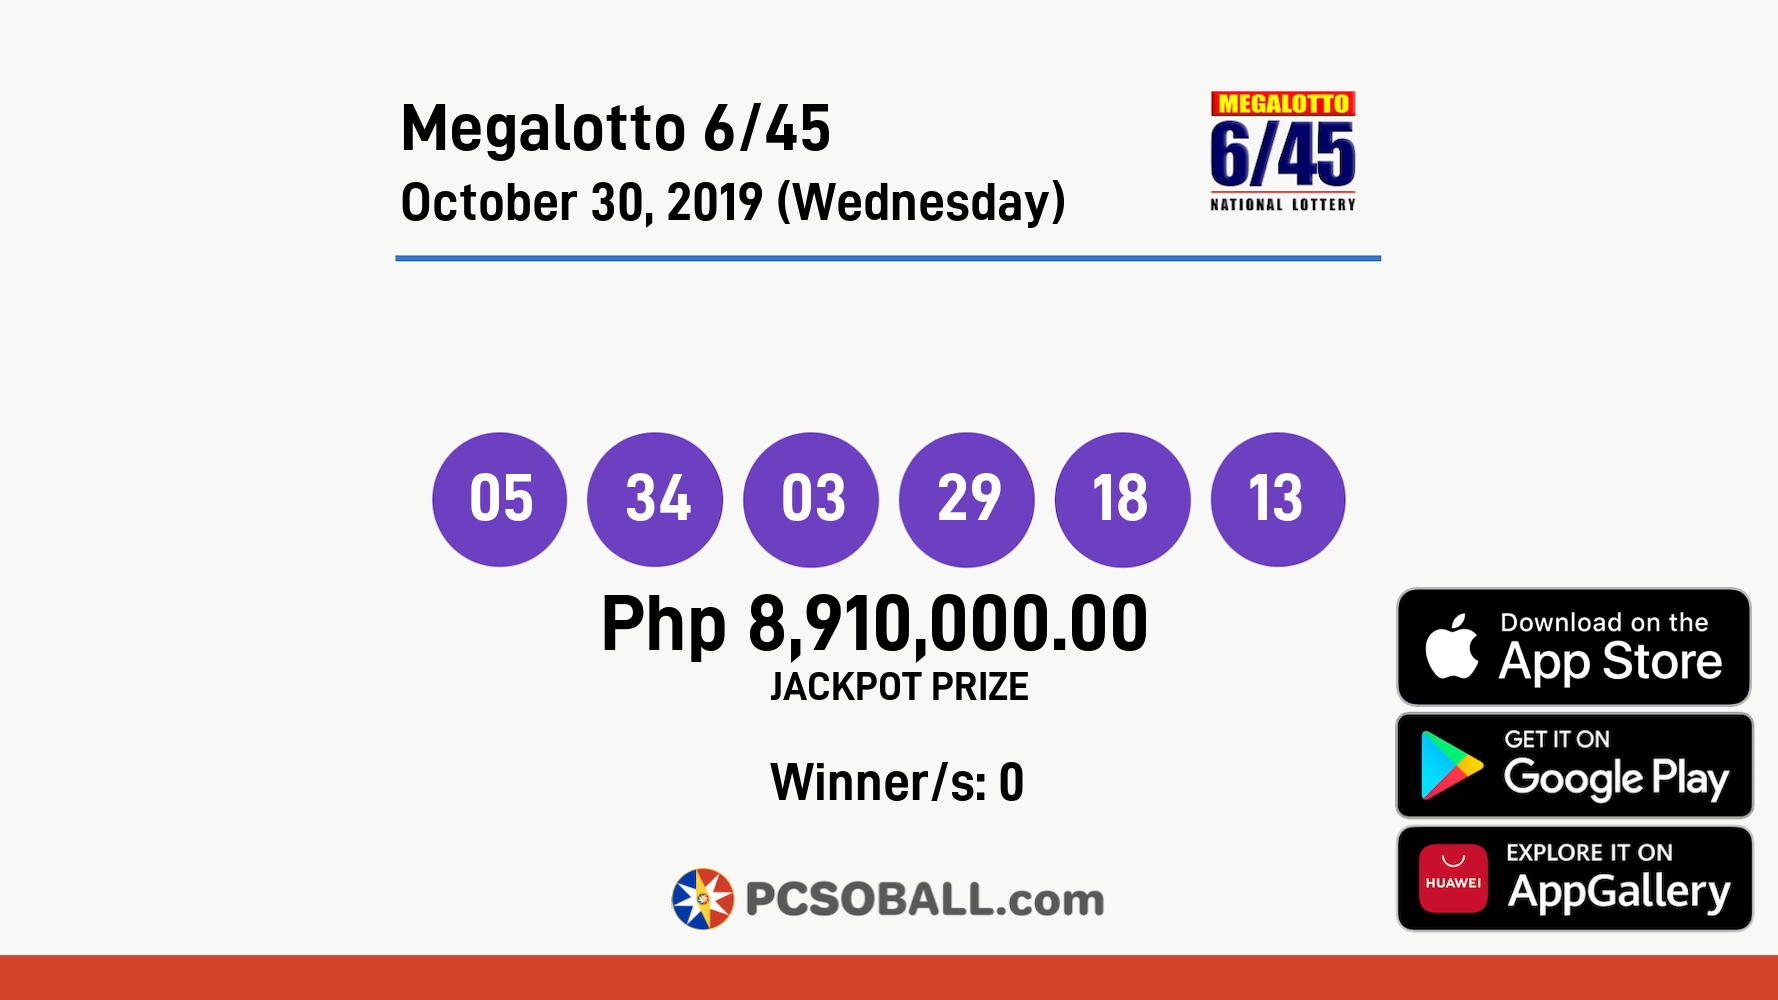 Megalotto 6/45 October 30, 2019 (Wednesday) Result